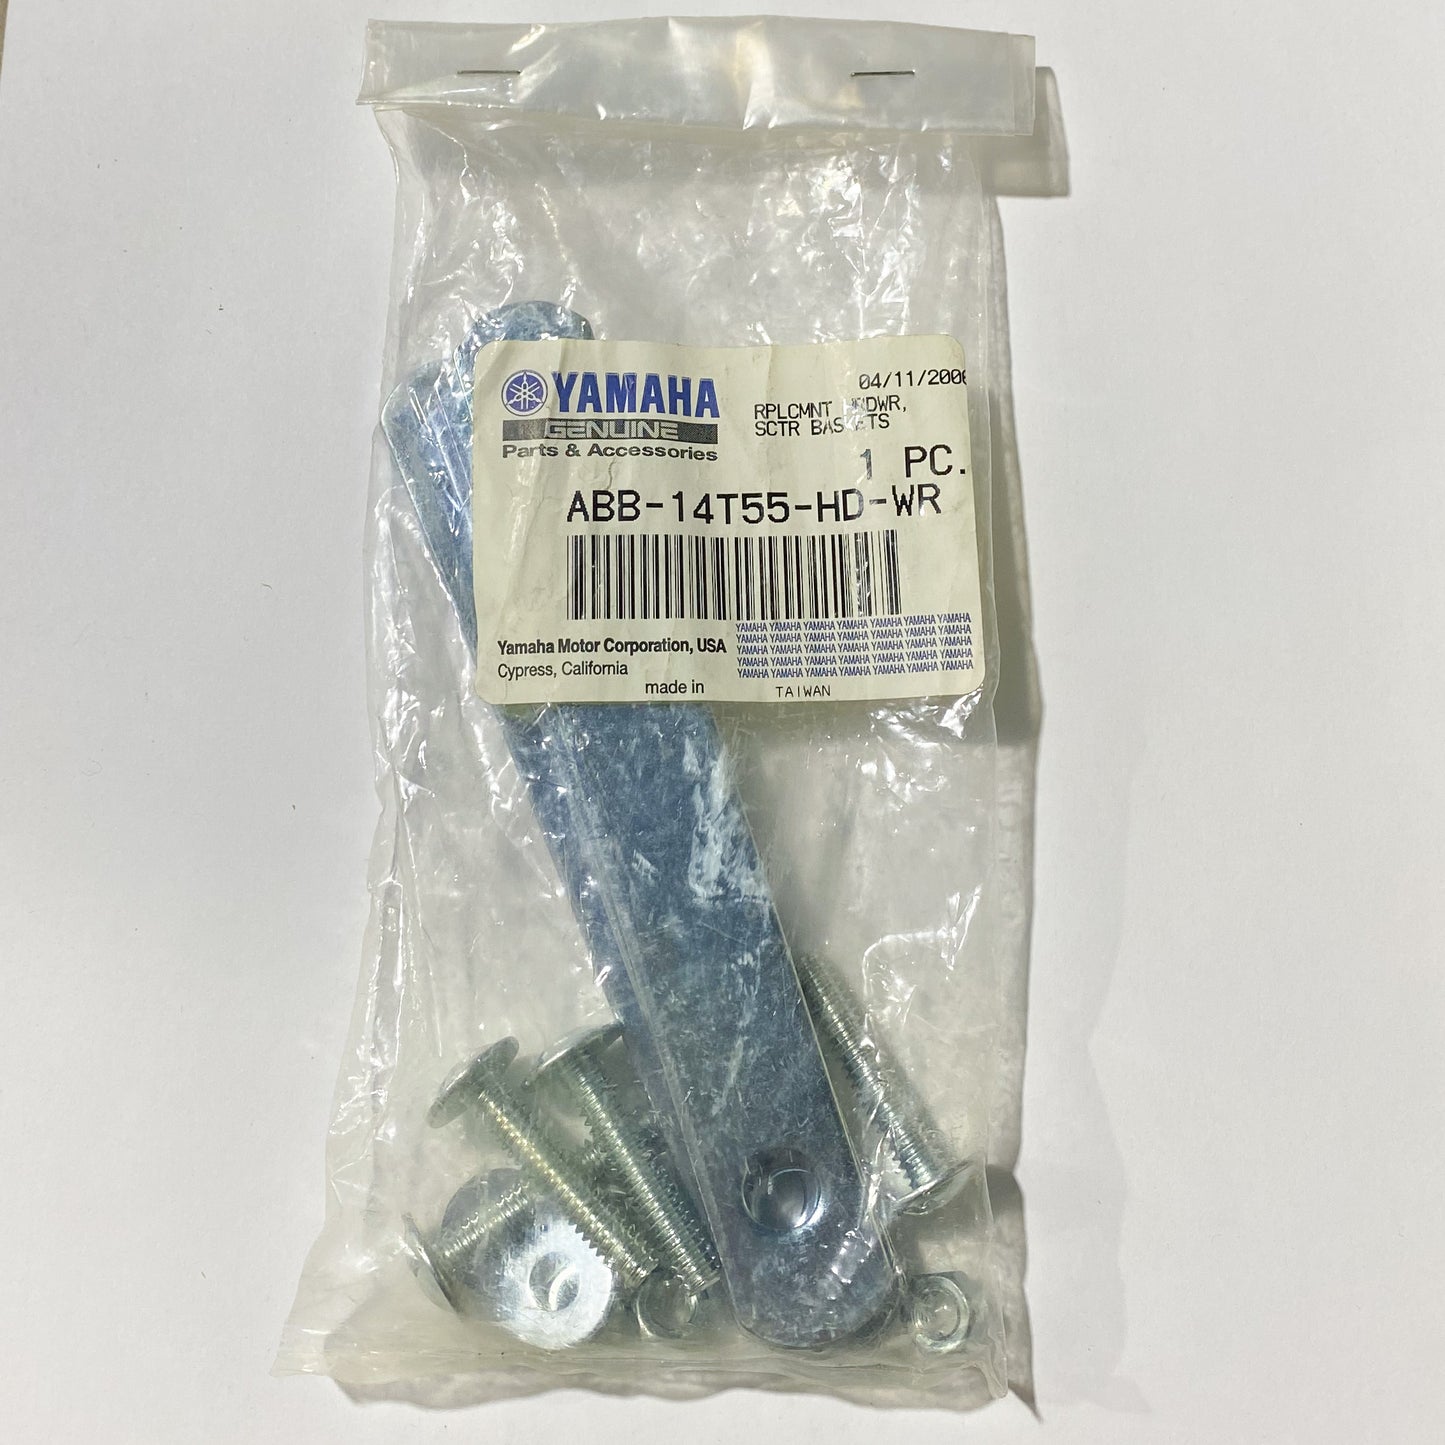 YAMAHA REPLACEMENT HARDWARE FOR SCOOTER BASKETS ABB-14T55-HD-WR